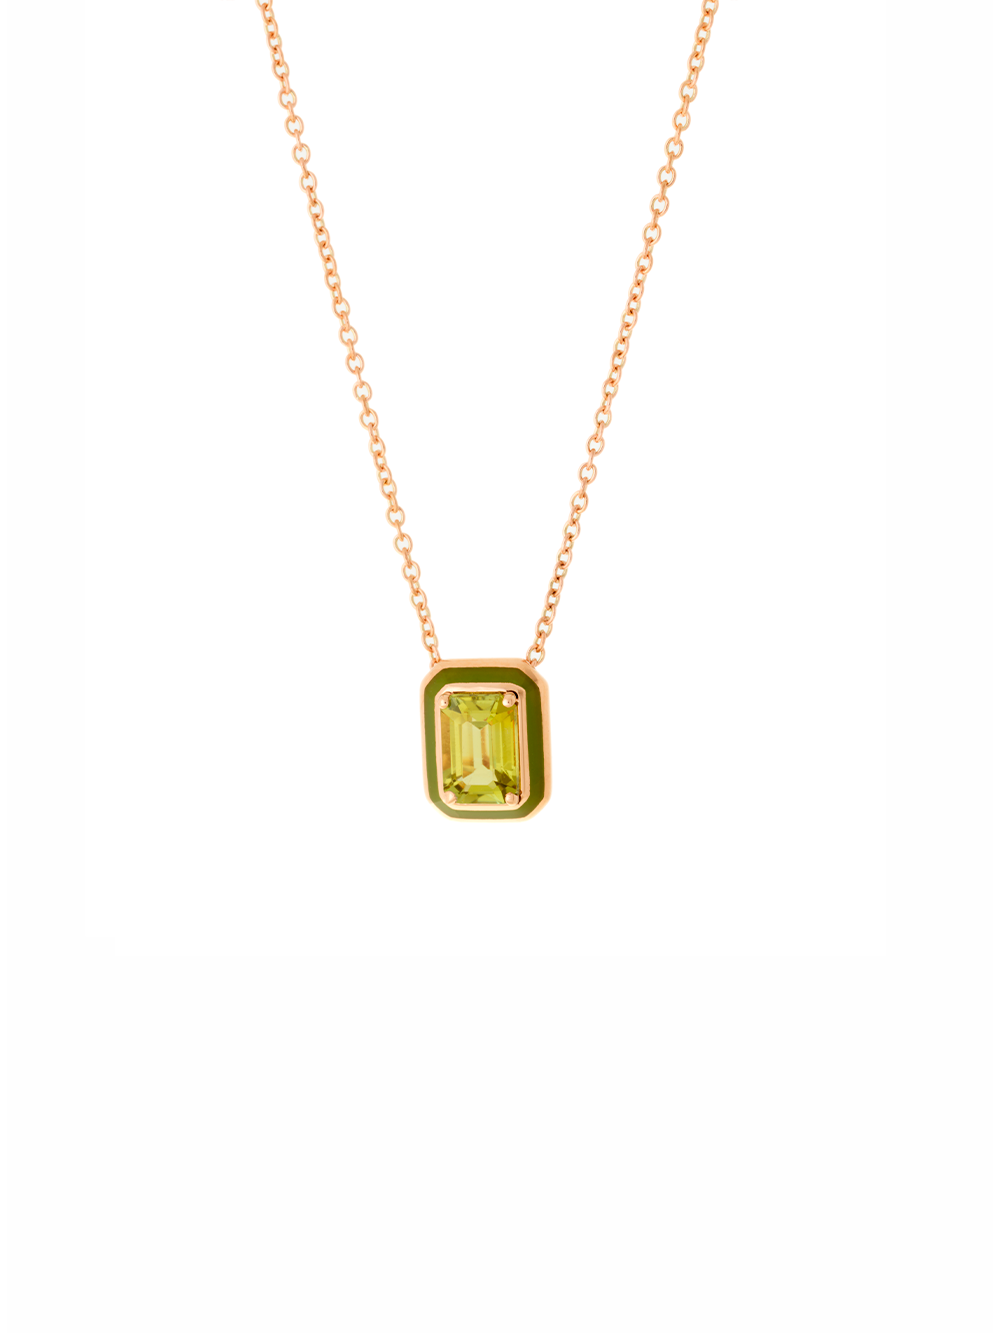 Green and OLIVE EMAIL TOURMAIN NECKLACE